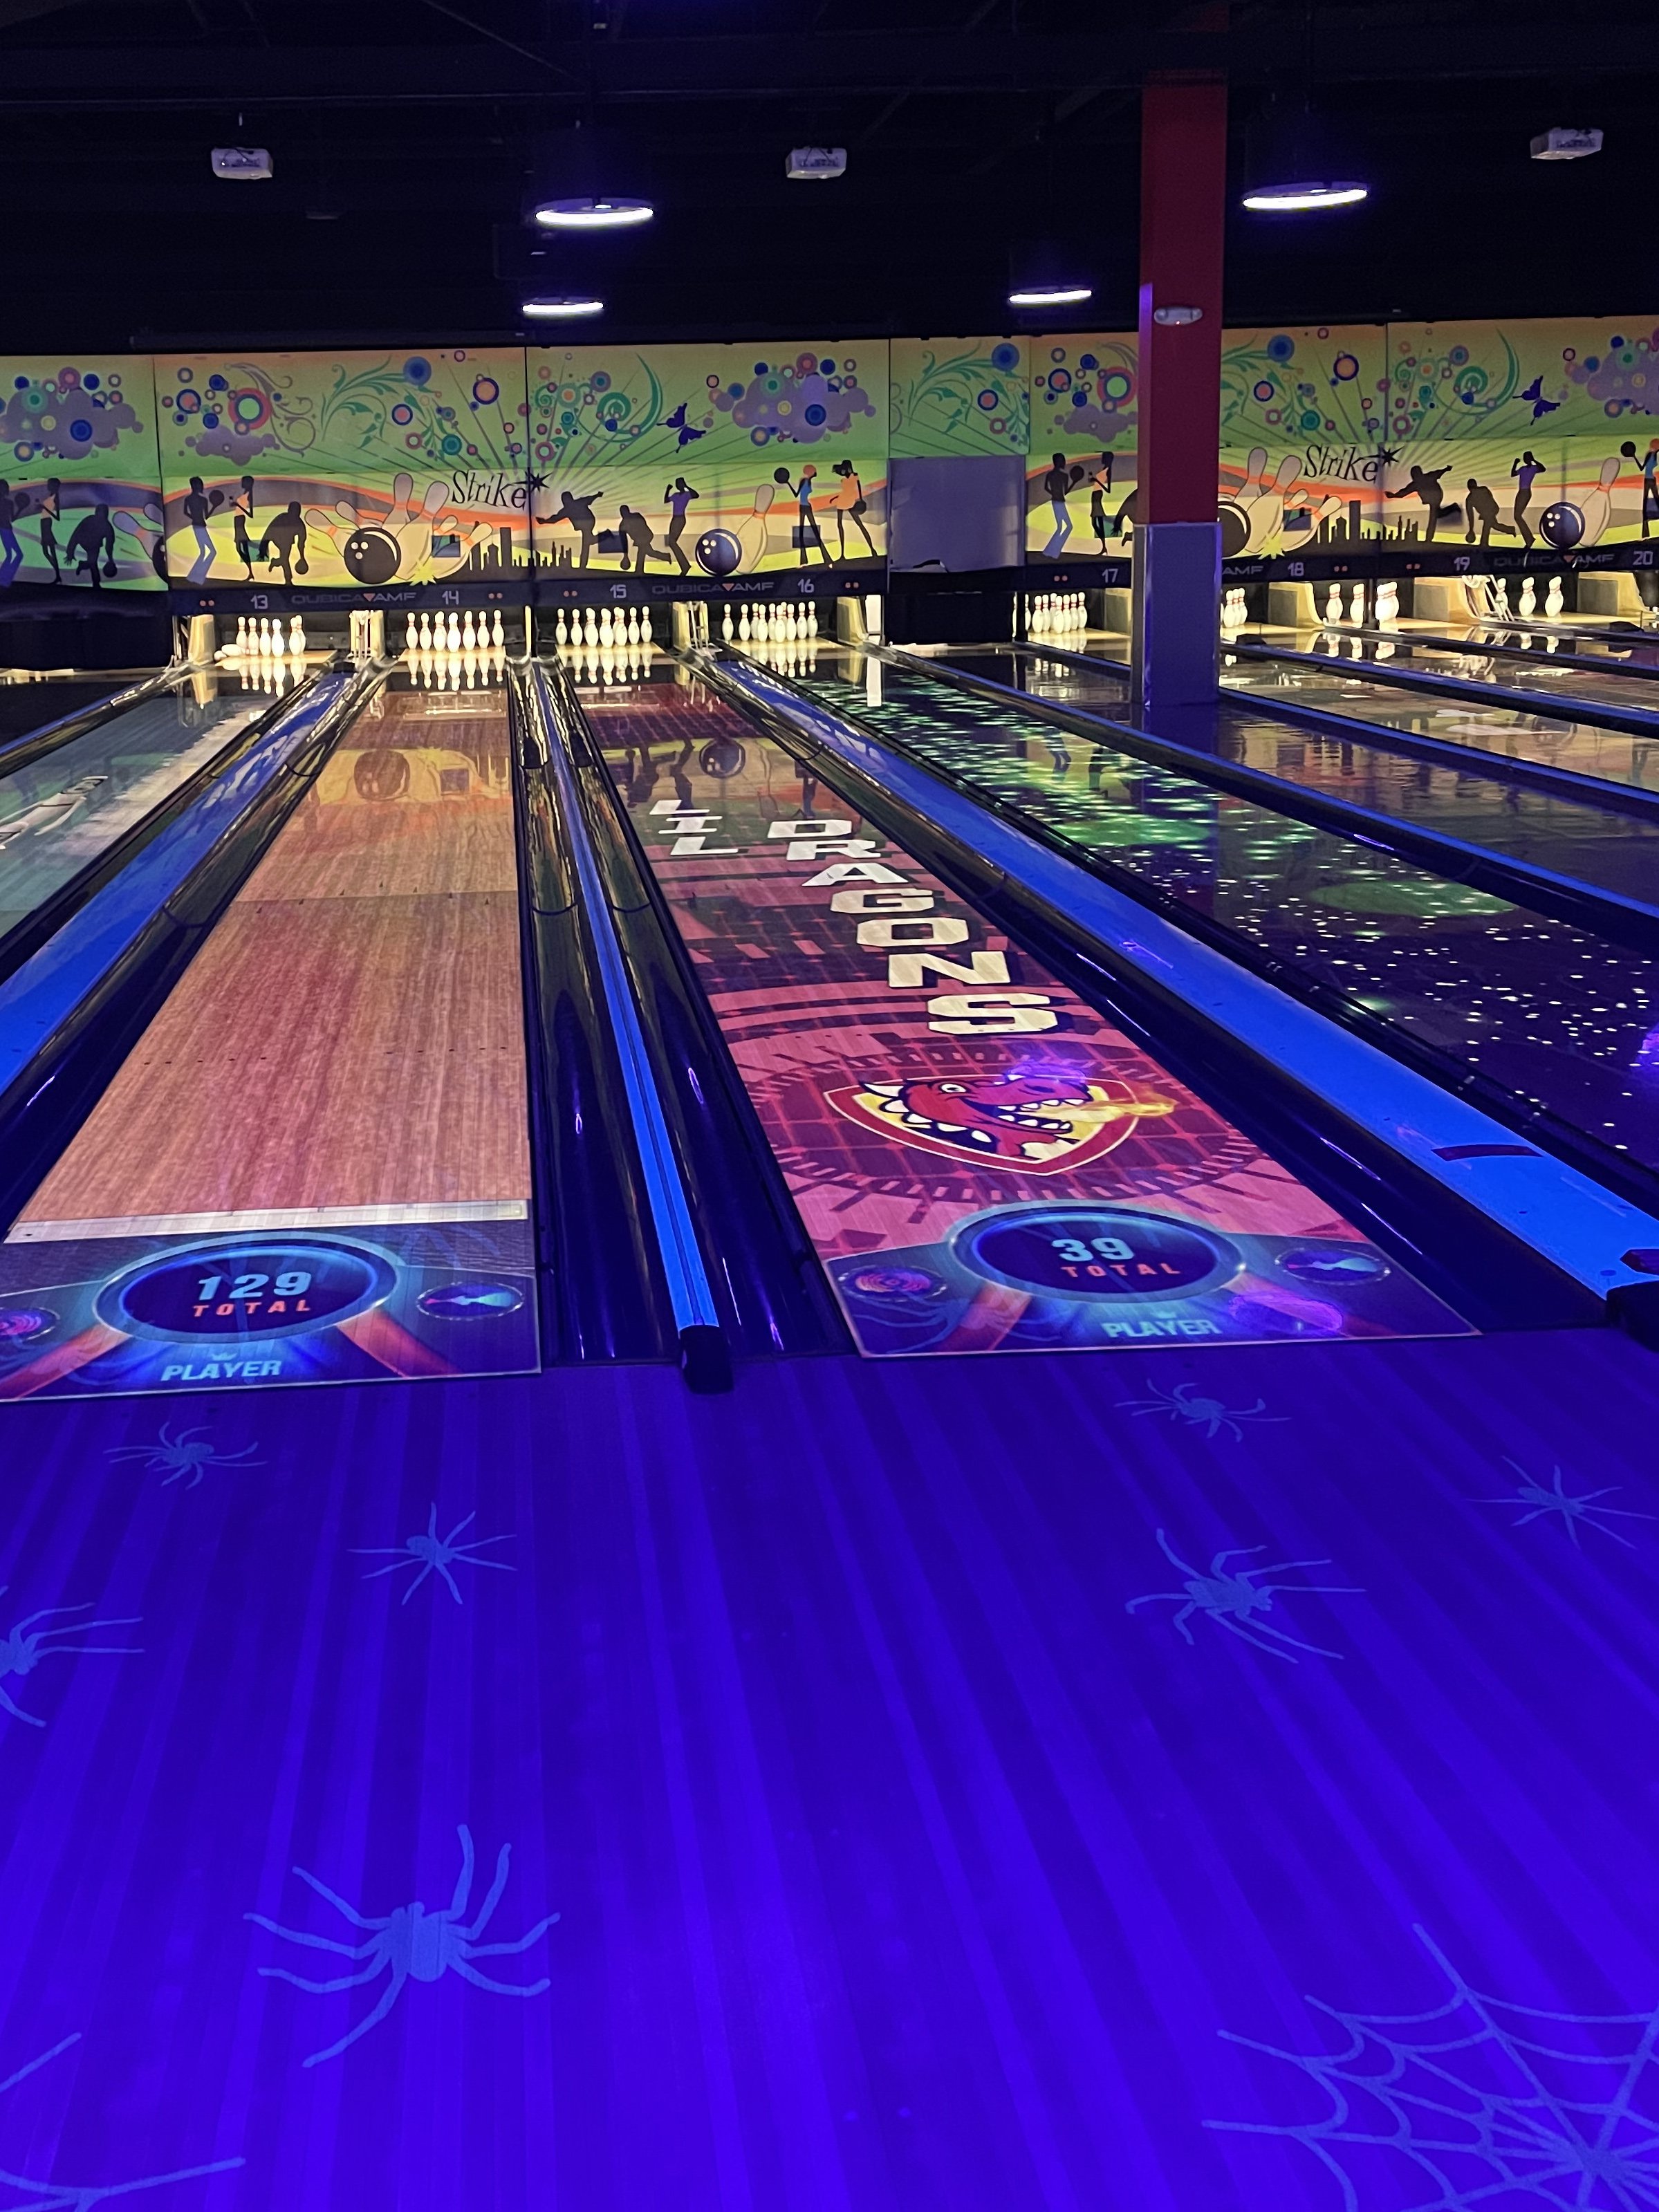 Spark Bowling Light up the lane! Round1 USA